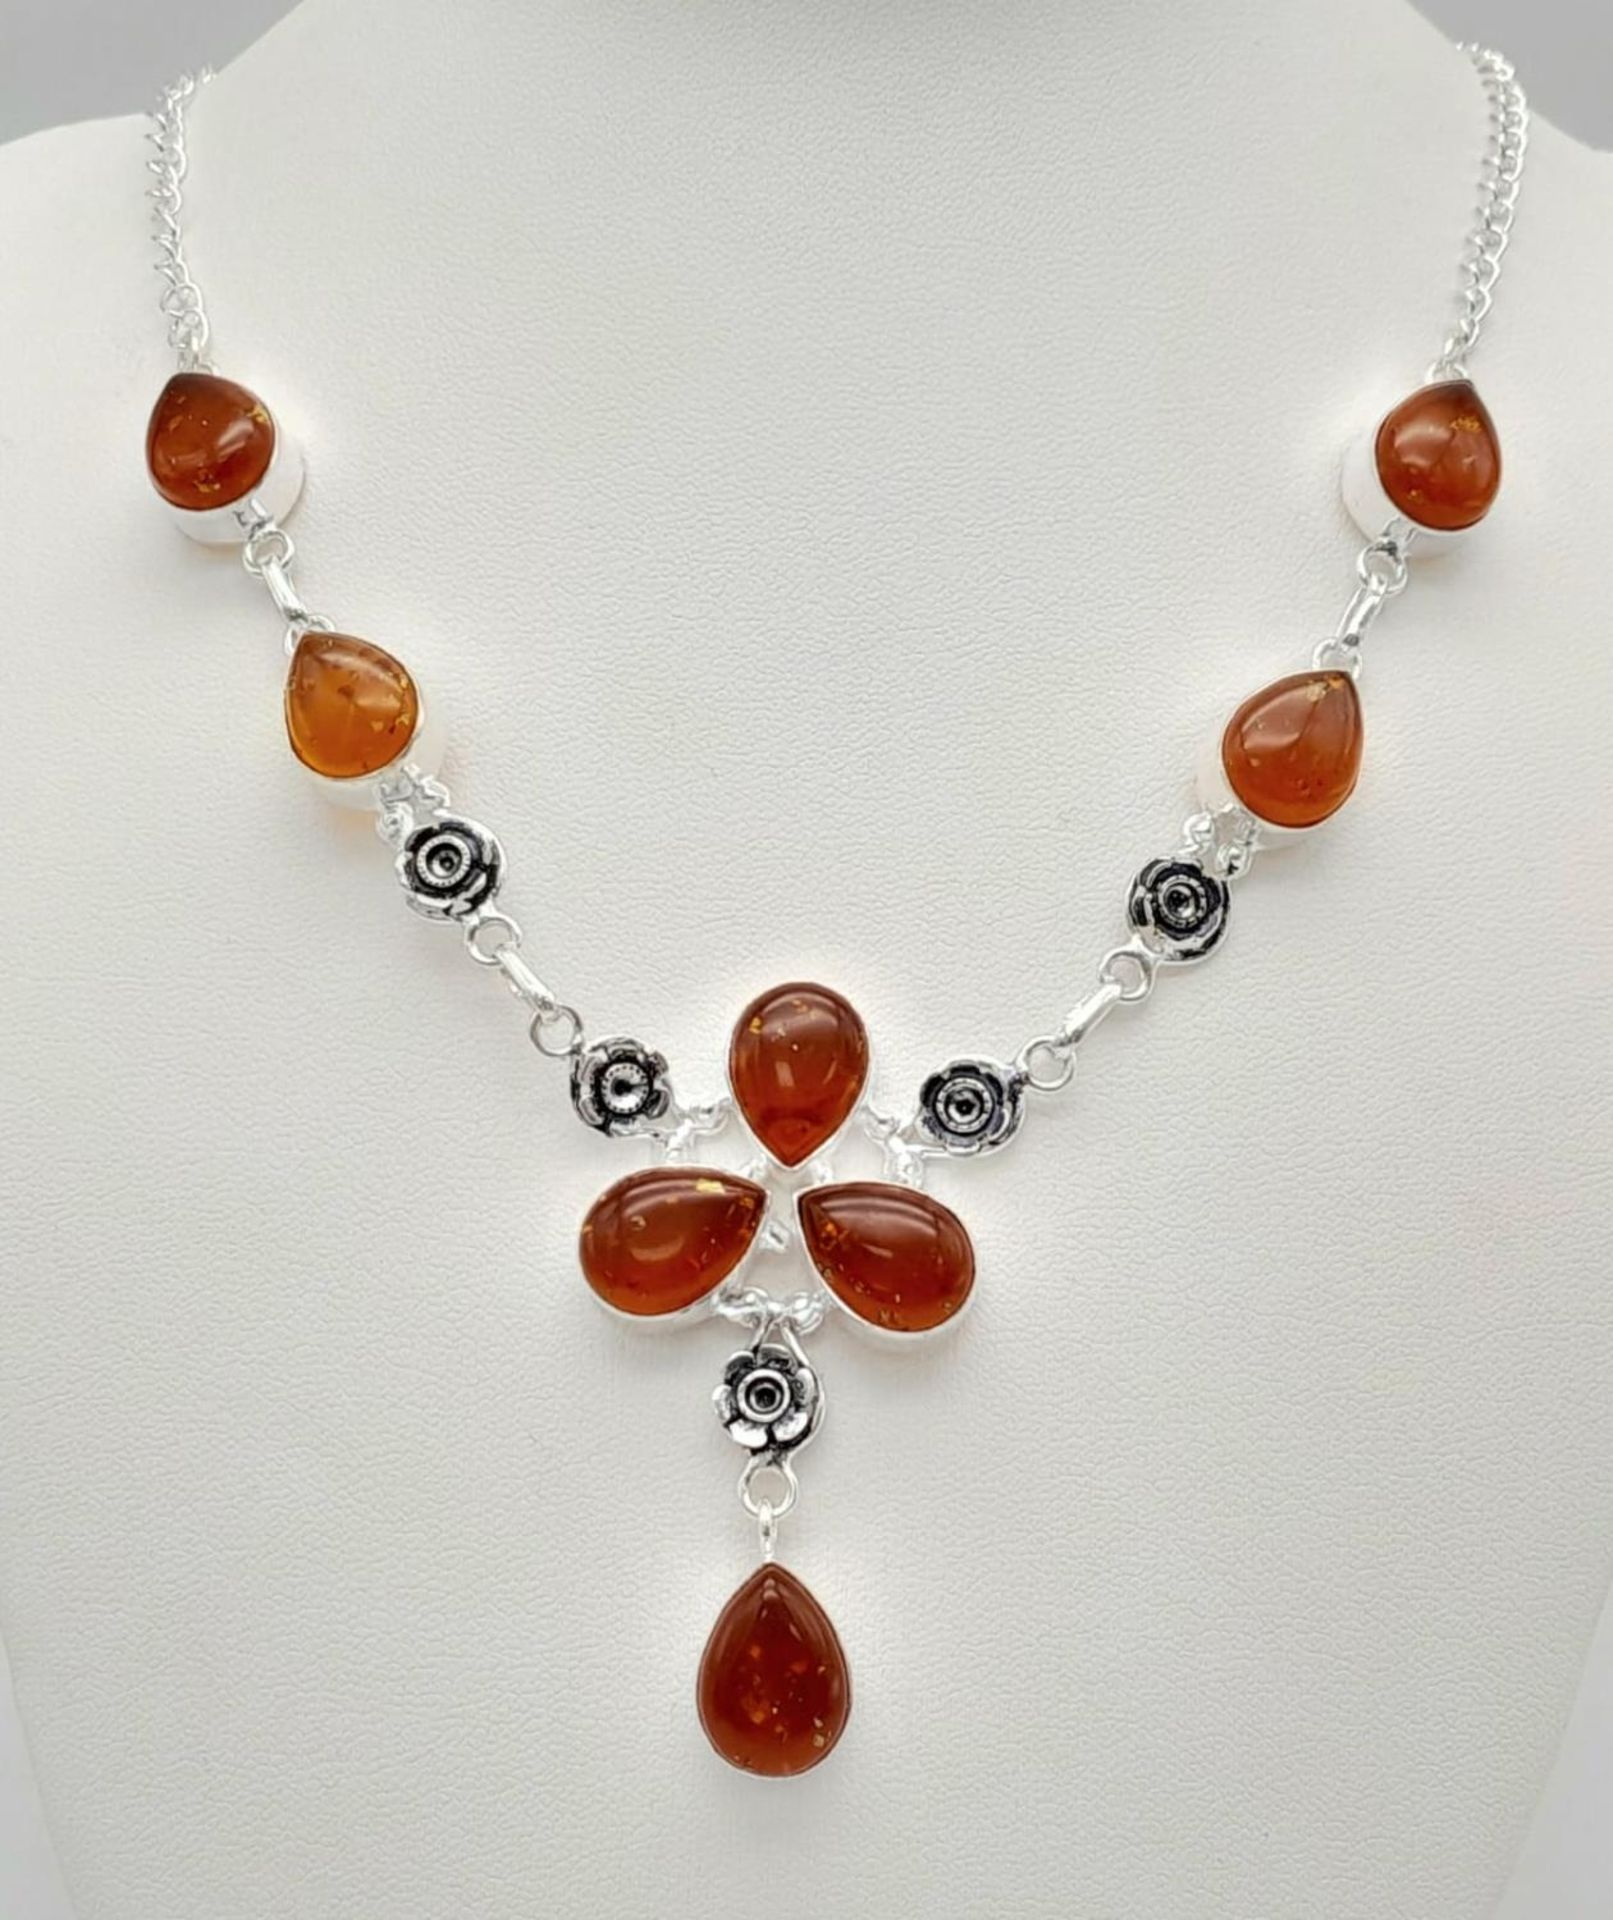 An Amber Resin Necklace set in 925 Silver. 50cm.